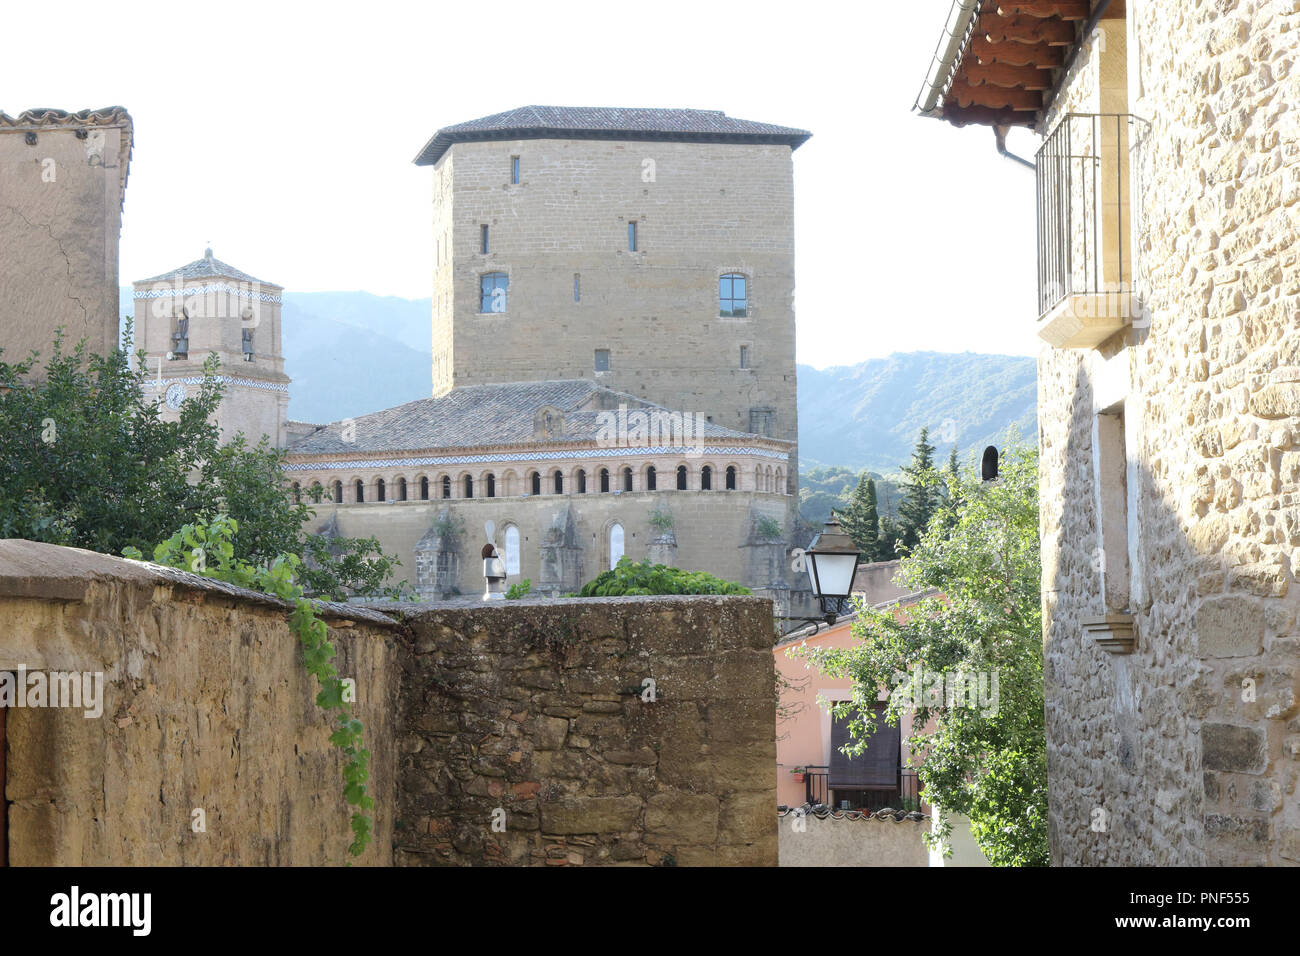 A panorama of the reinforced Saint Martin Church (Iglesia de San Martin) which served also as a fortress in the small rural town of Biel, Spain Stock Photo